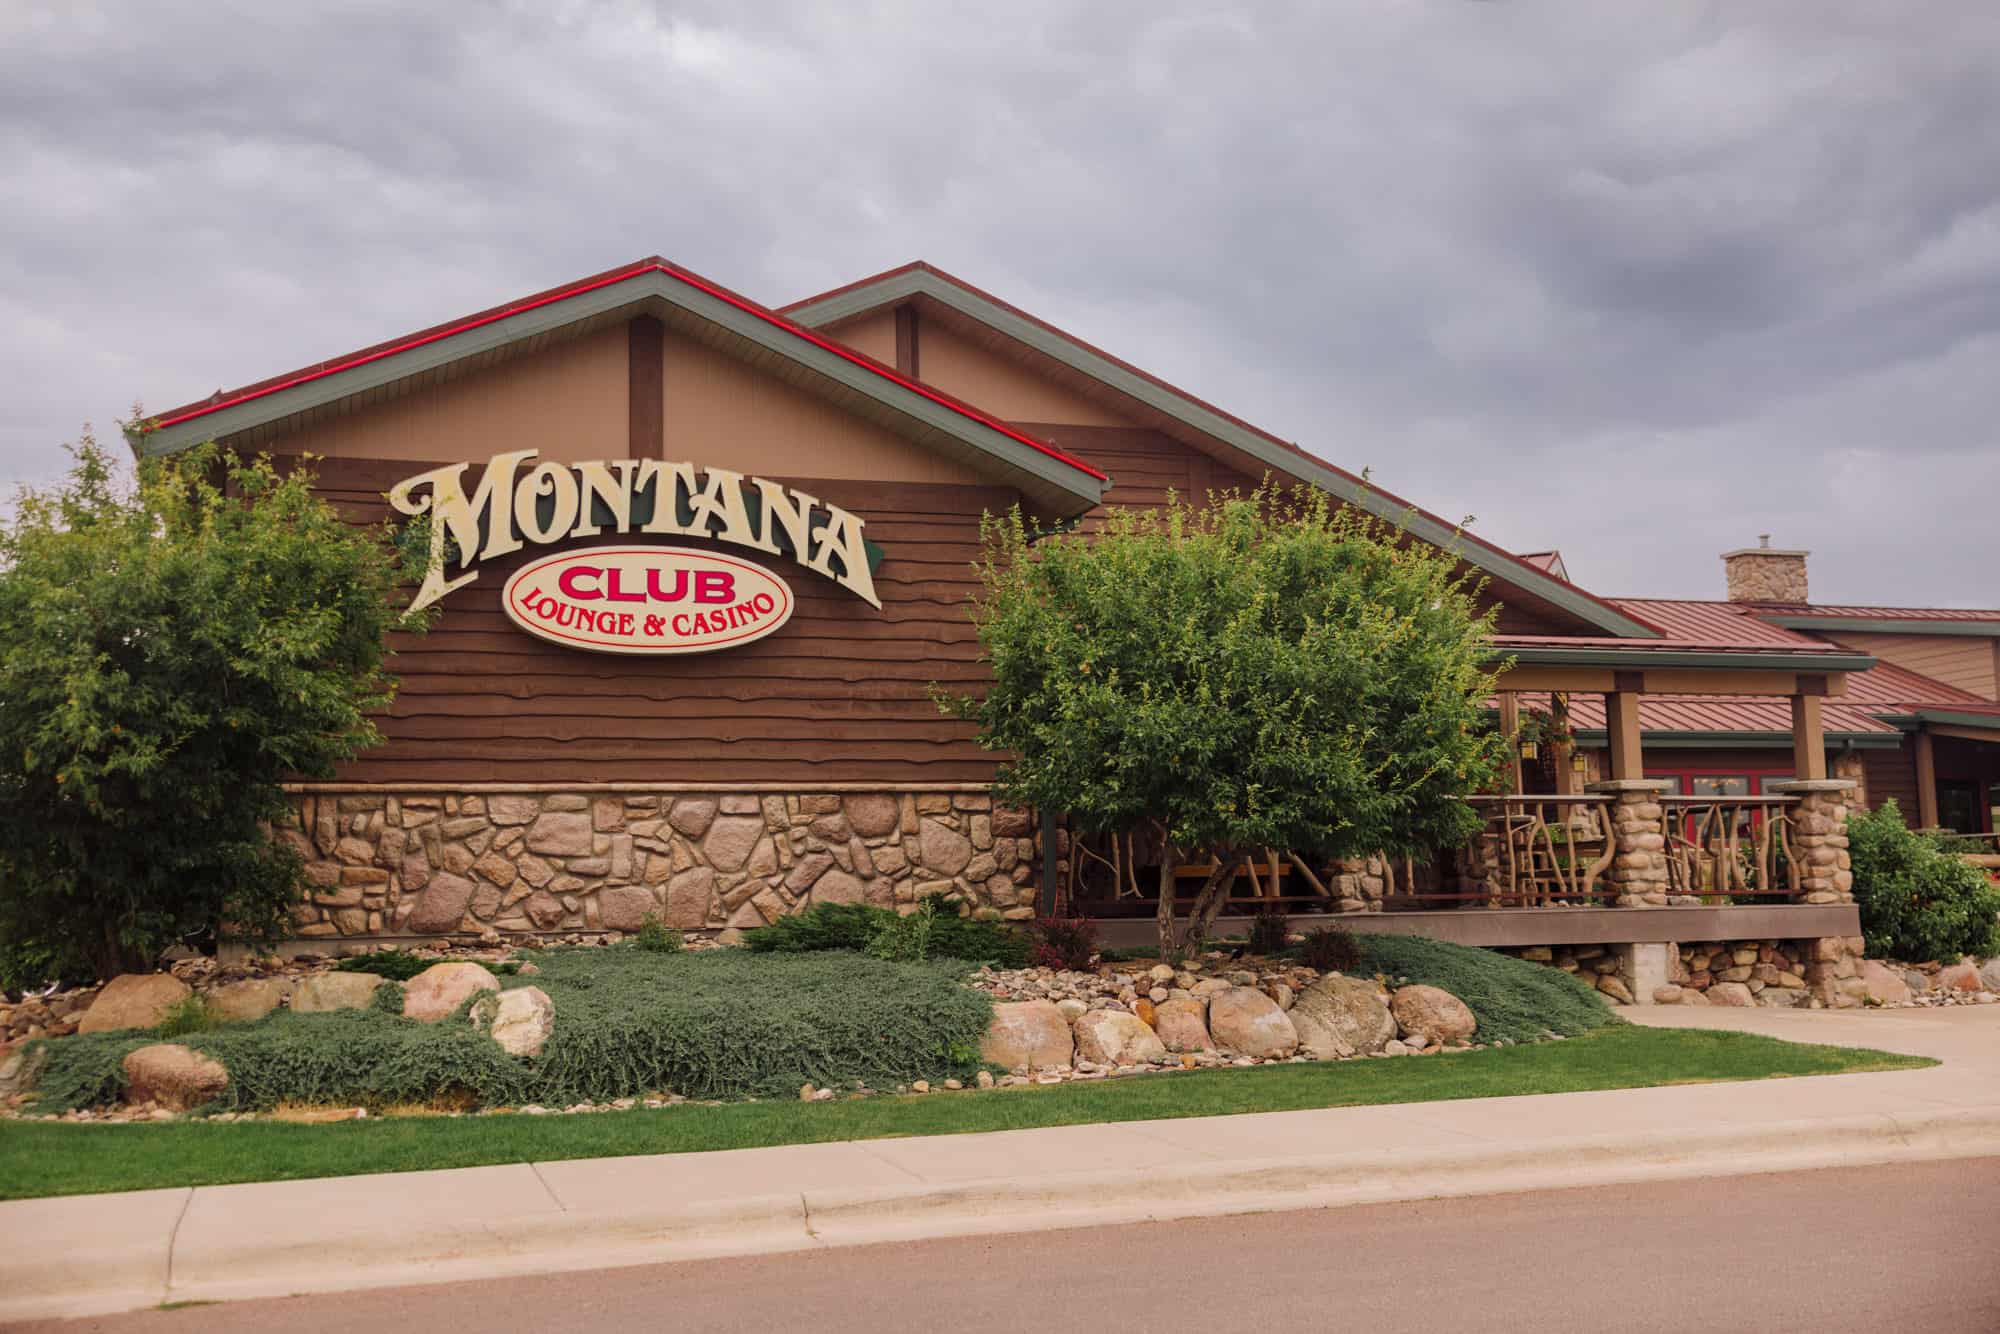 The Montana Club restaurant in Great Falls